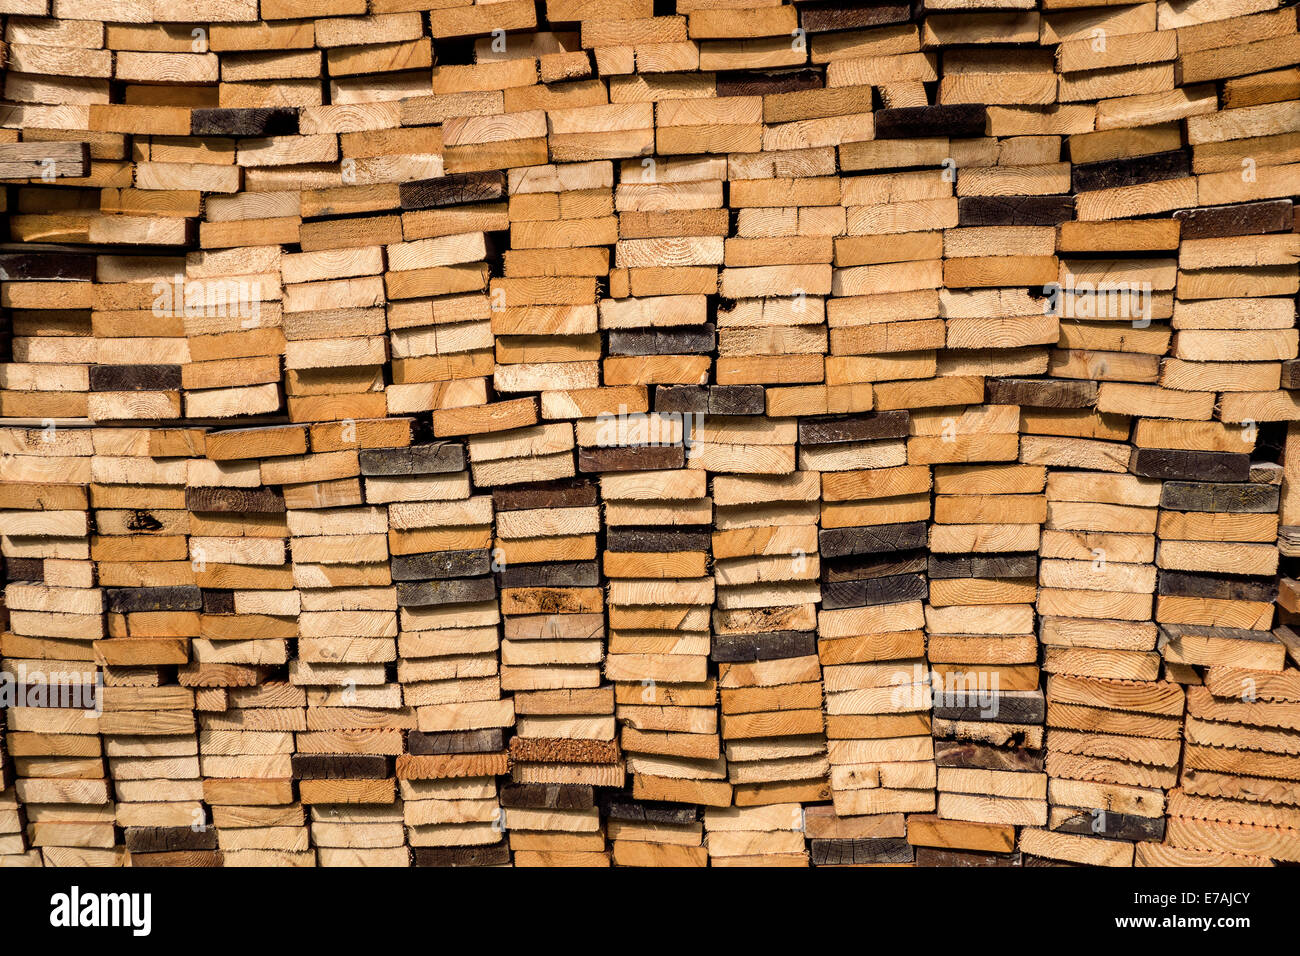 Piled boards Stock Photo